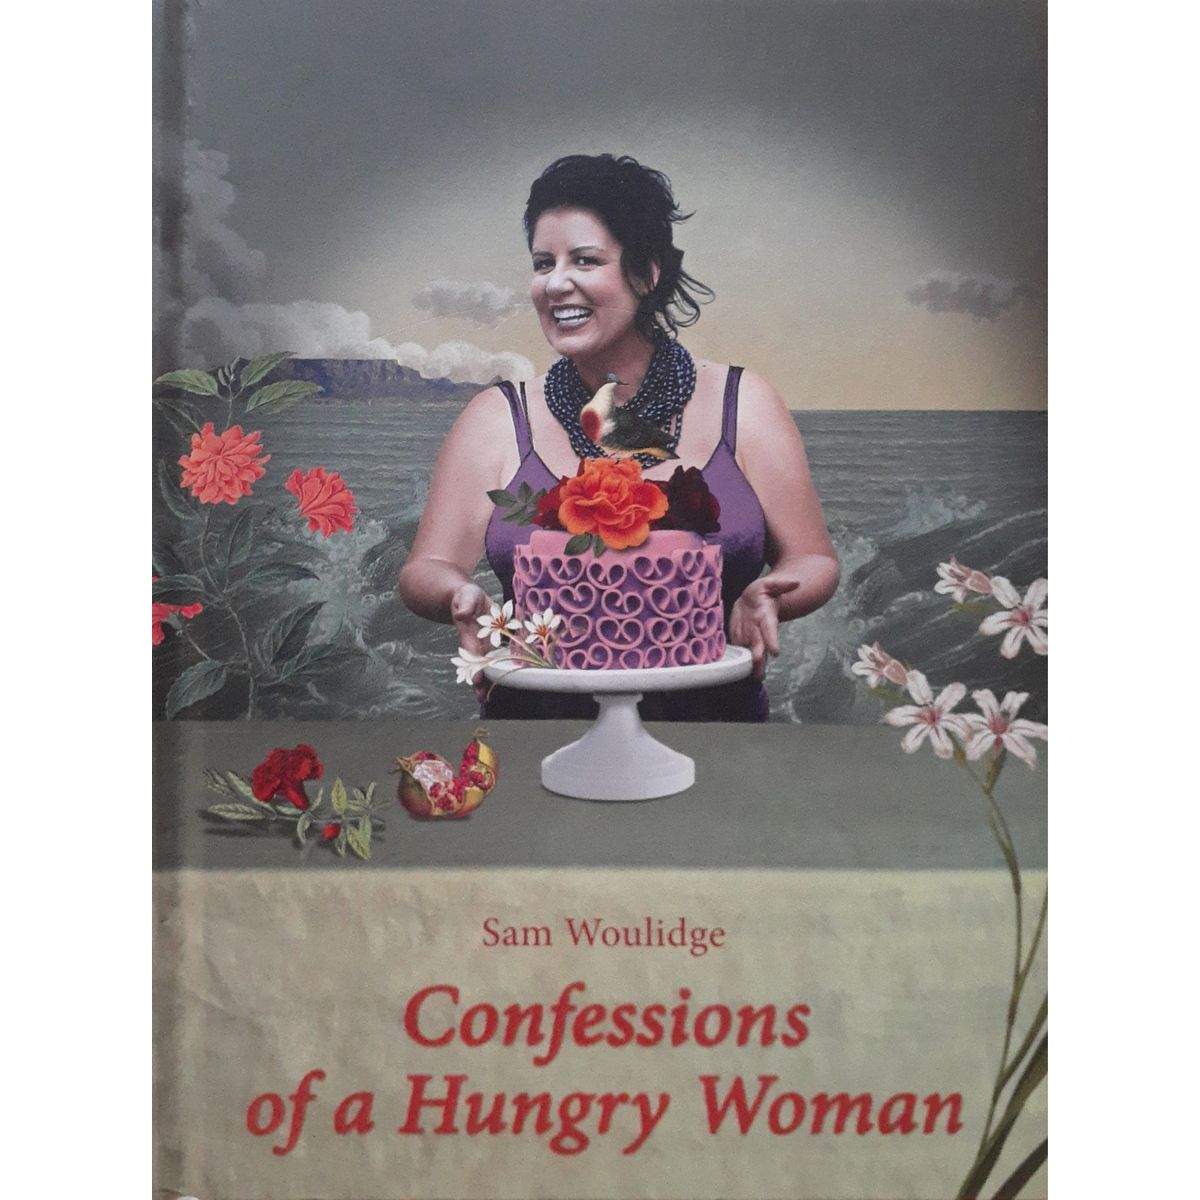 ISBN: 9781432300081 / 1432300083 - Confessions of a Hungry Woman by Sam Woulidge [2013]